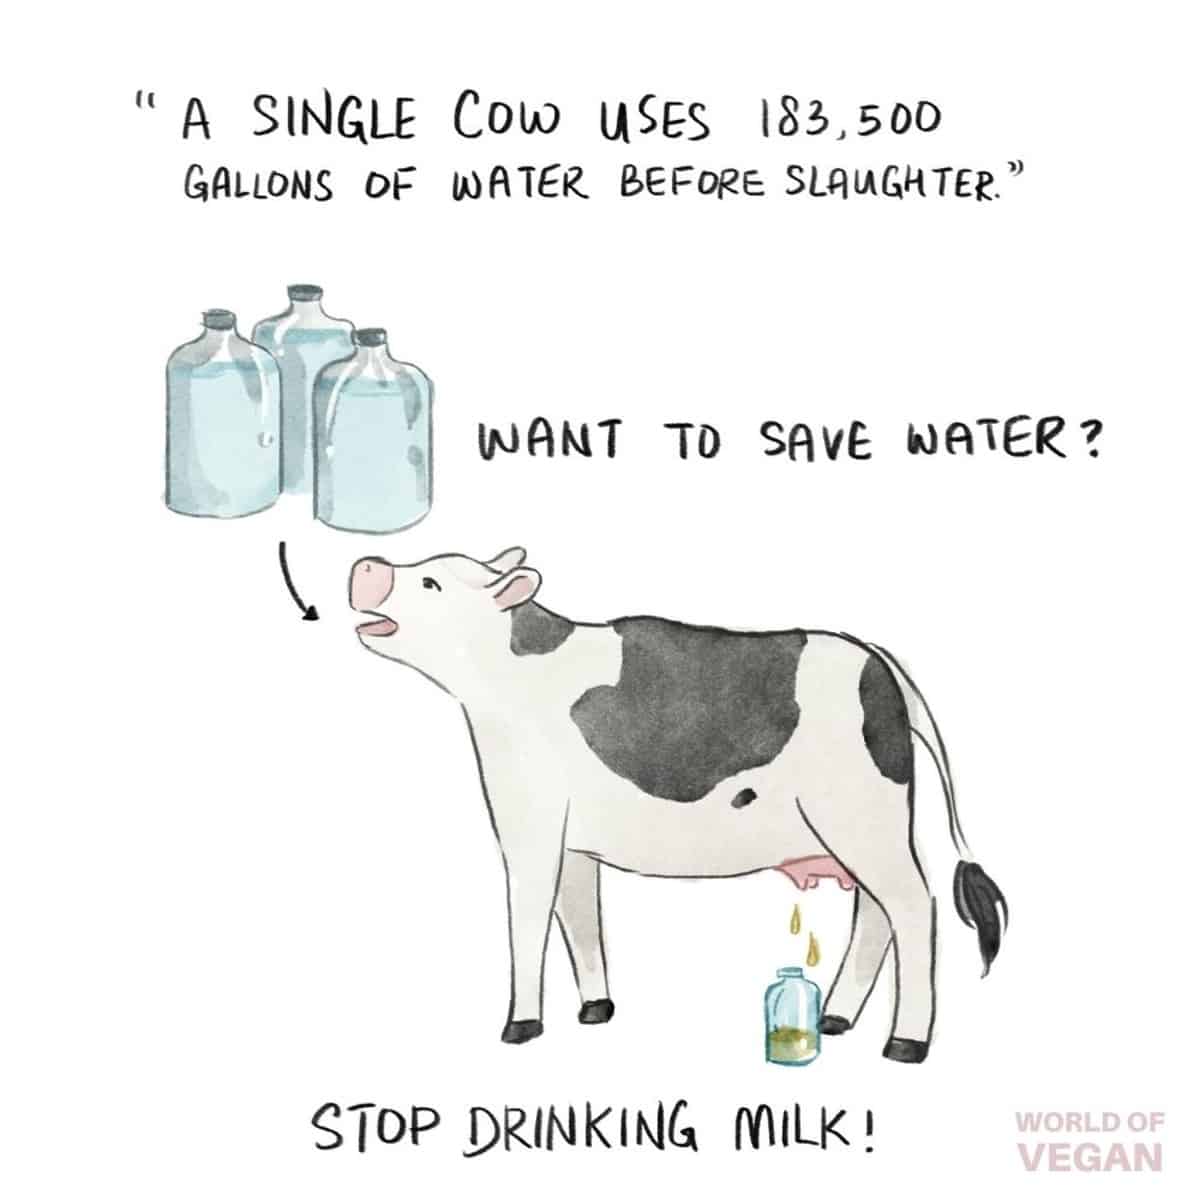 Vegan art illustration showing how much water cows drink in the dairy industry.